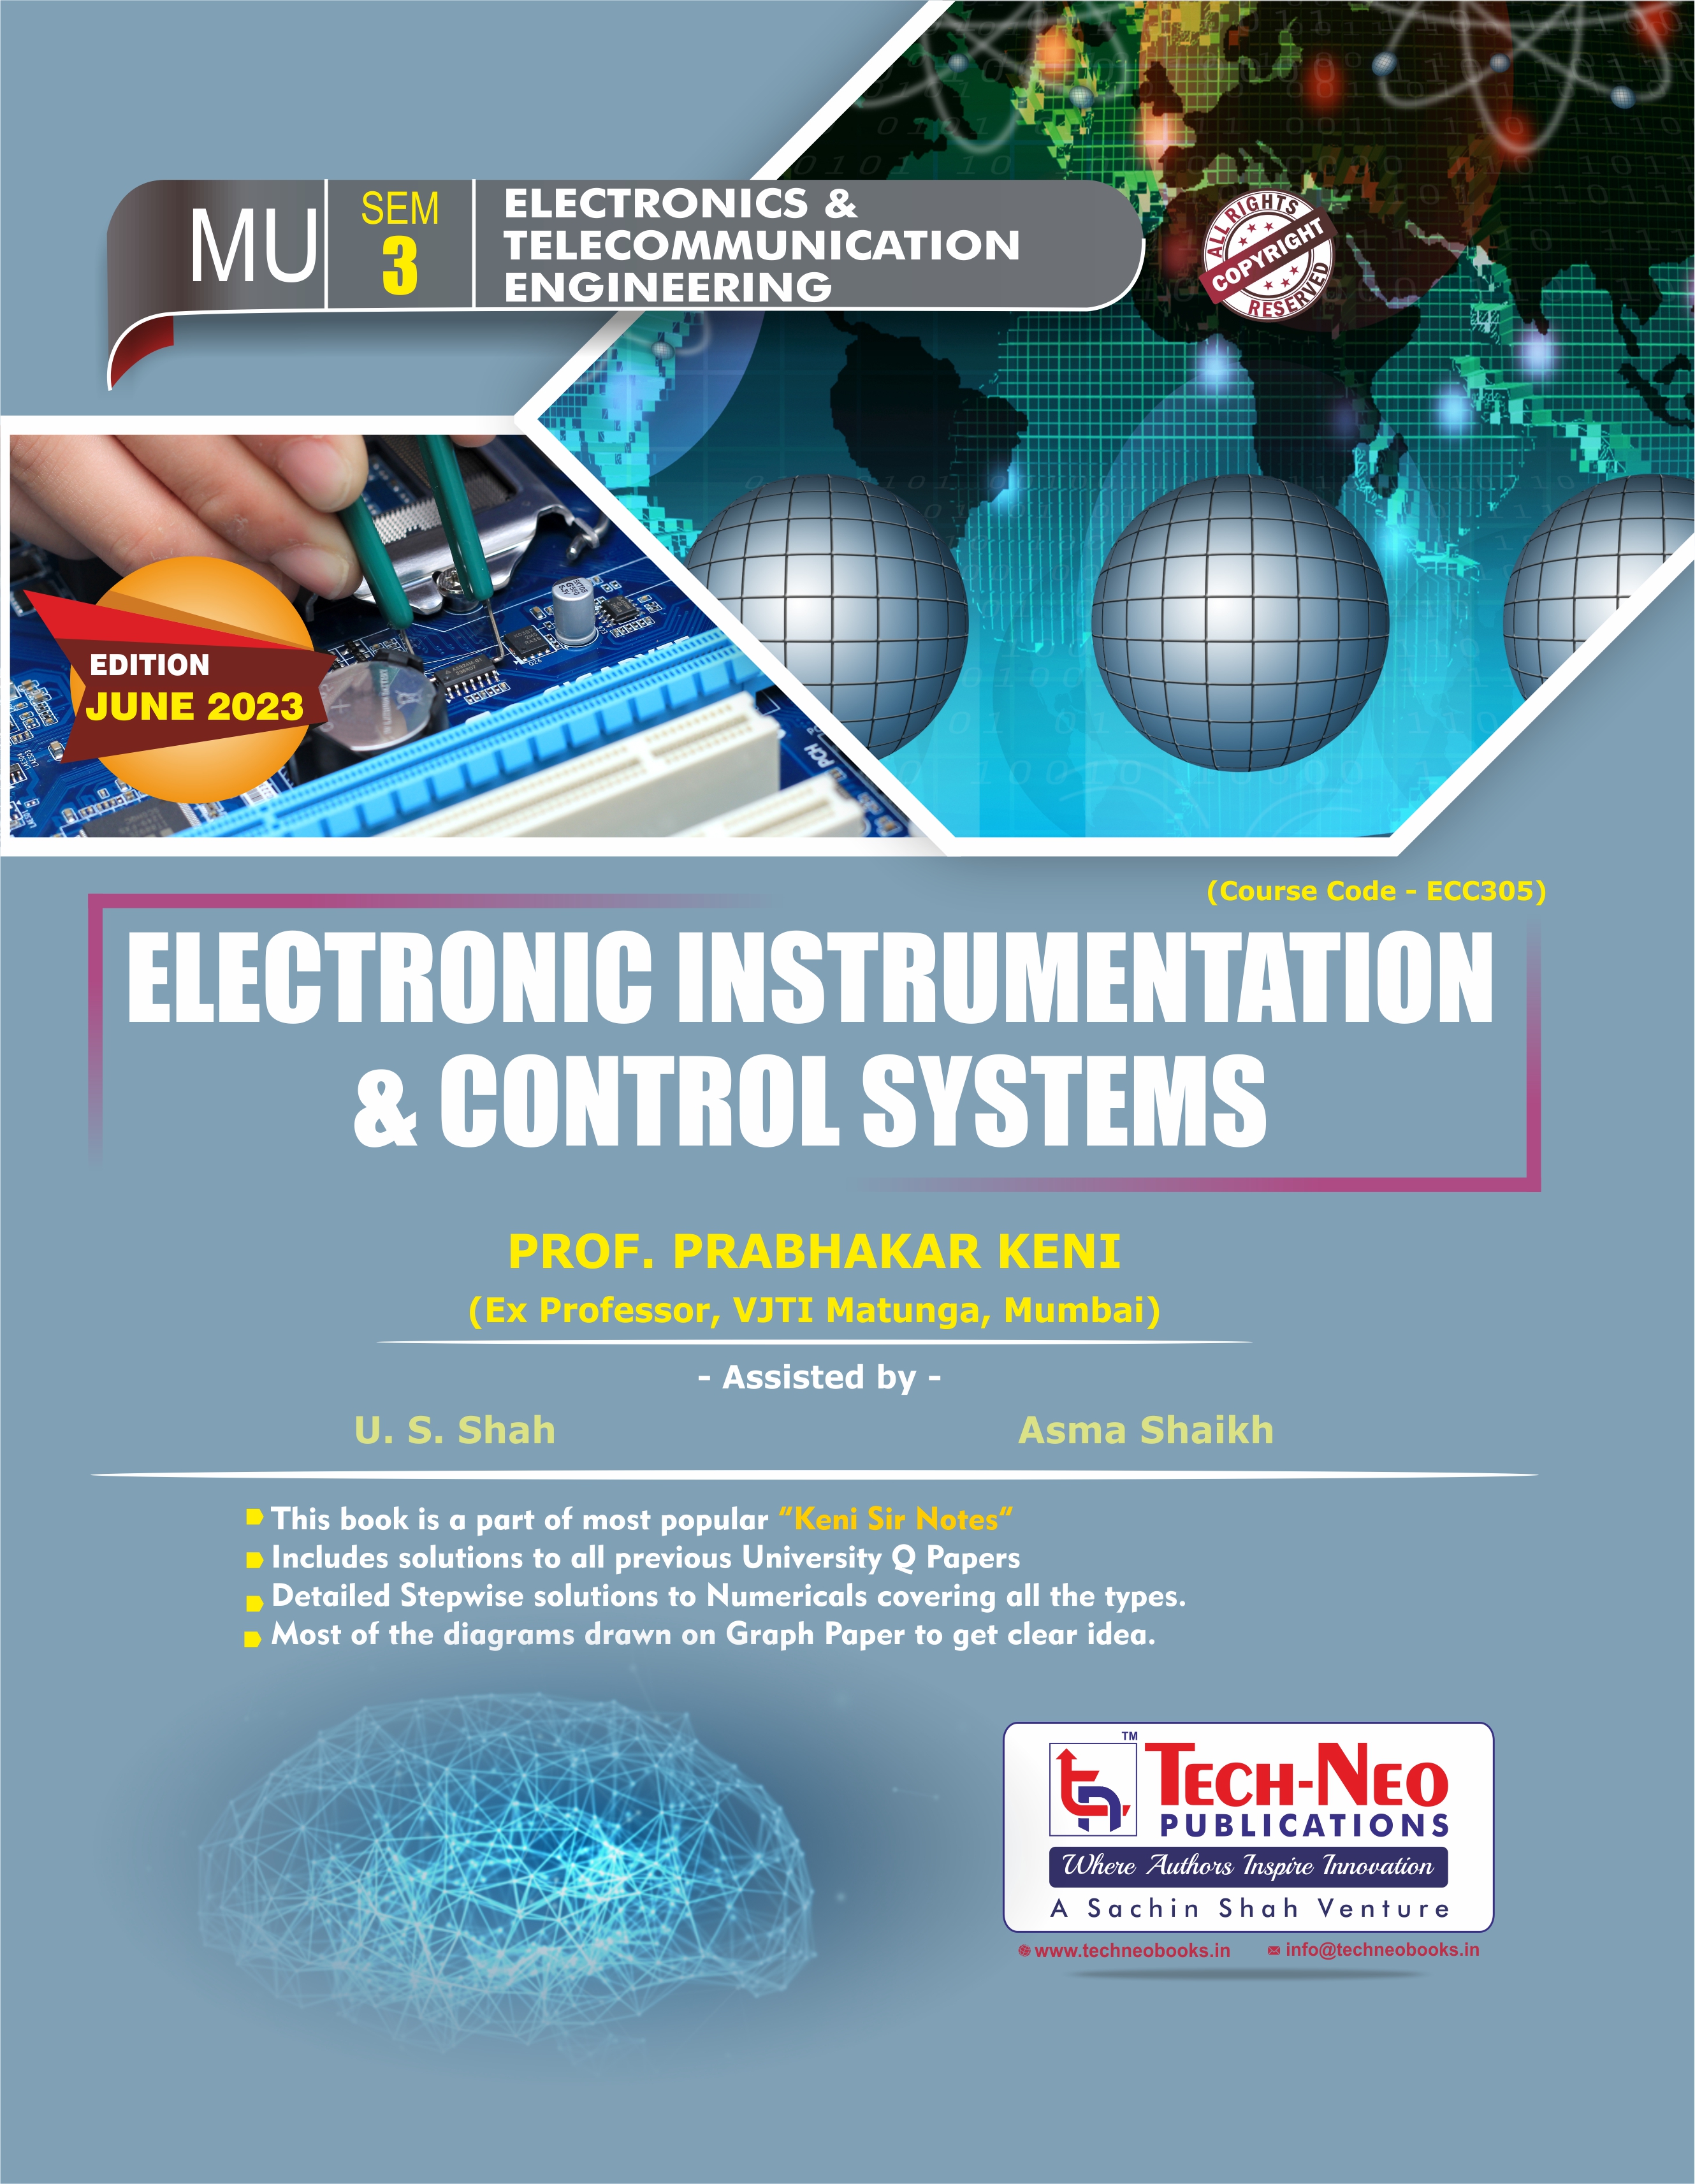 Electronic Instrumentation and Control Systems